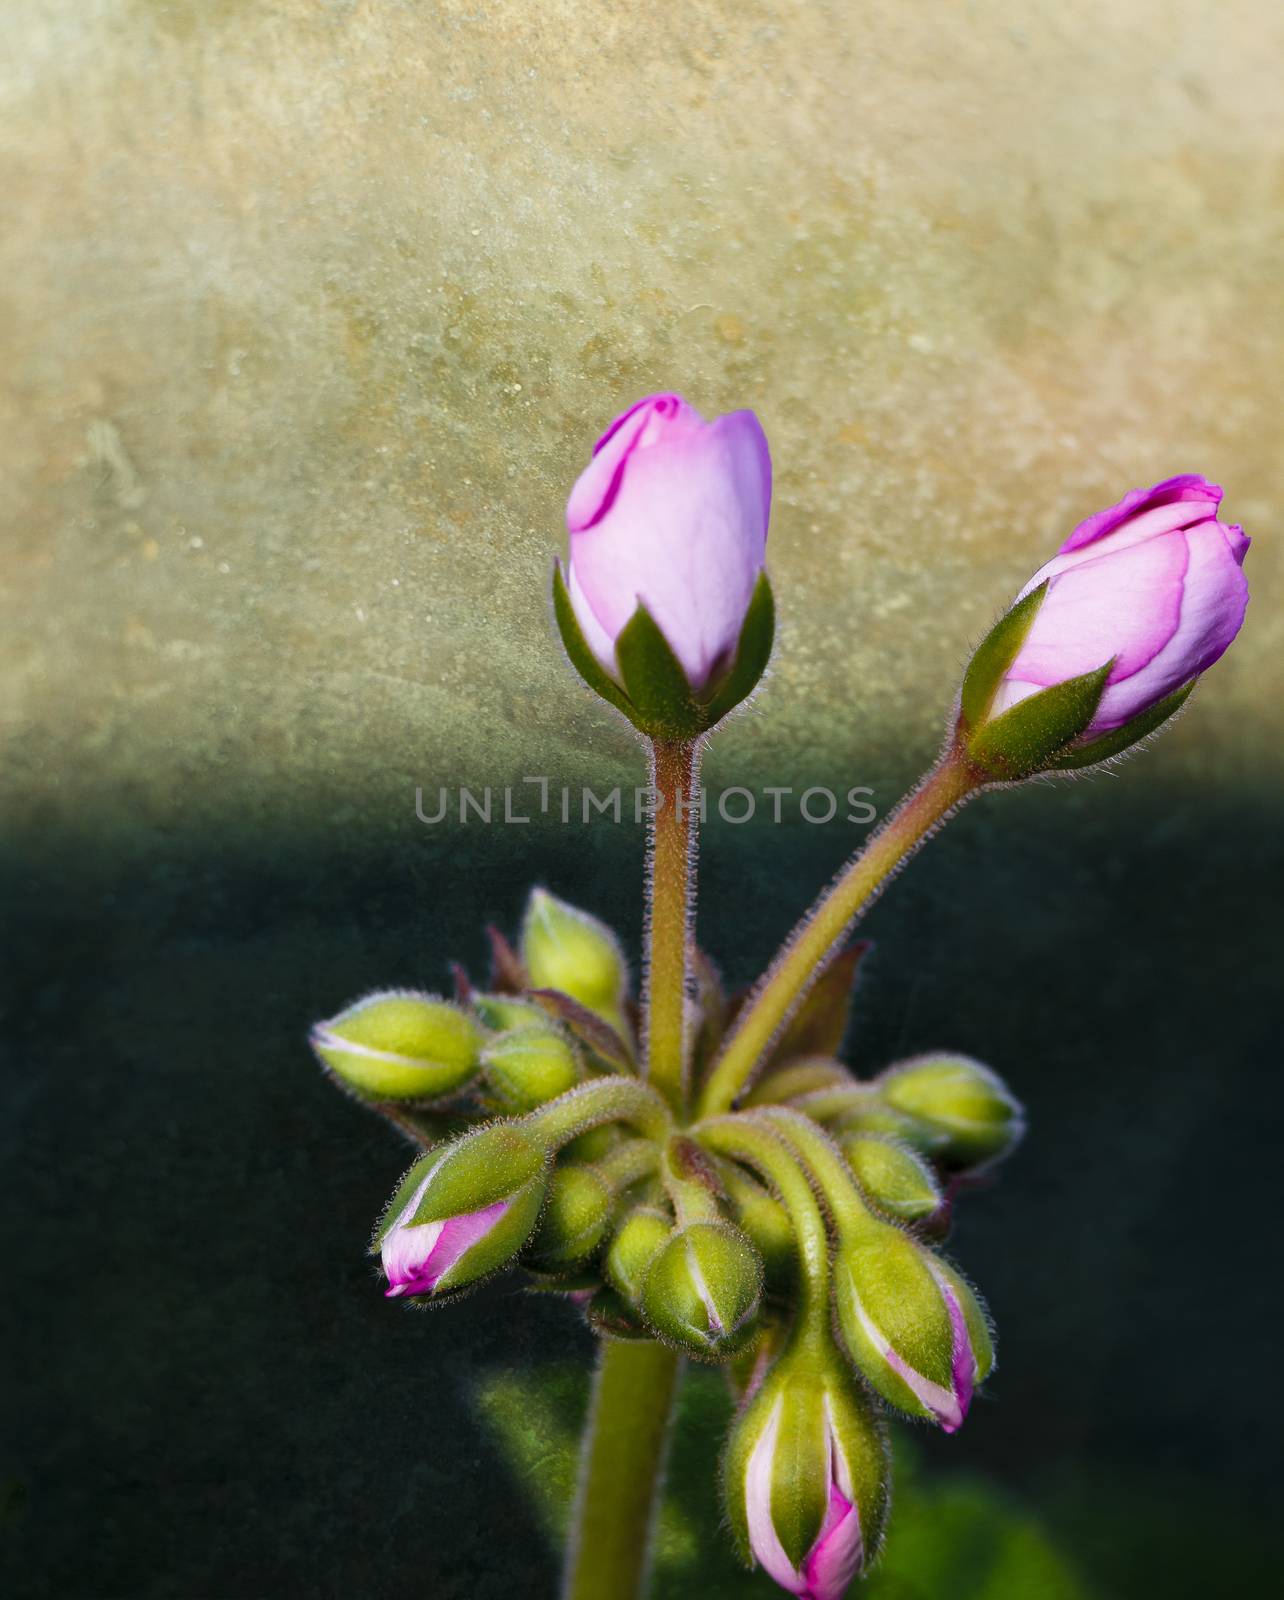 Pink flower buds about to blossom on a long stem with leaves by WittkePhotos